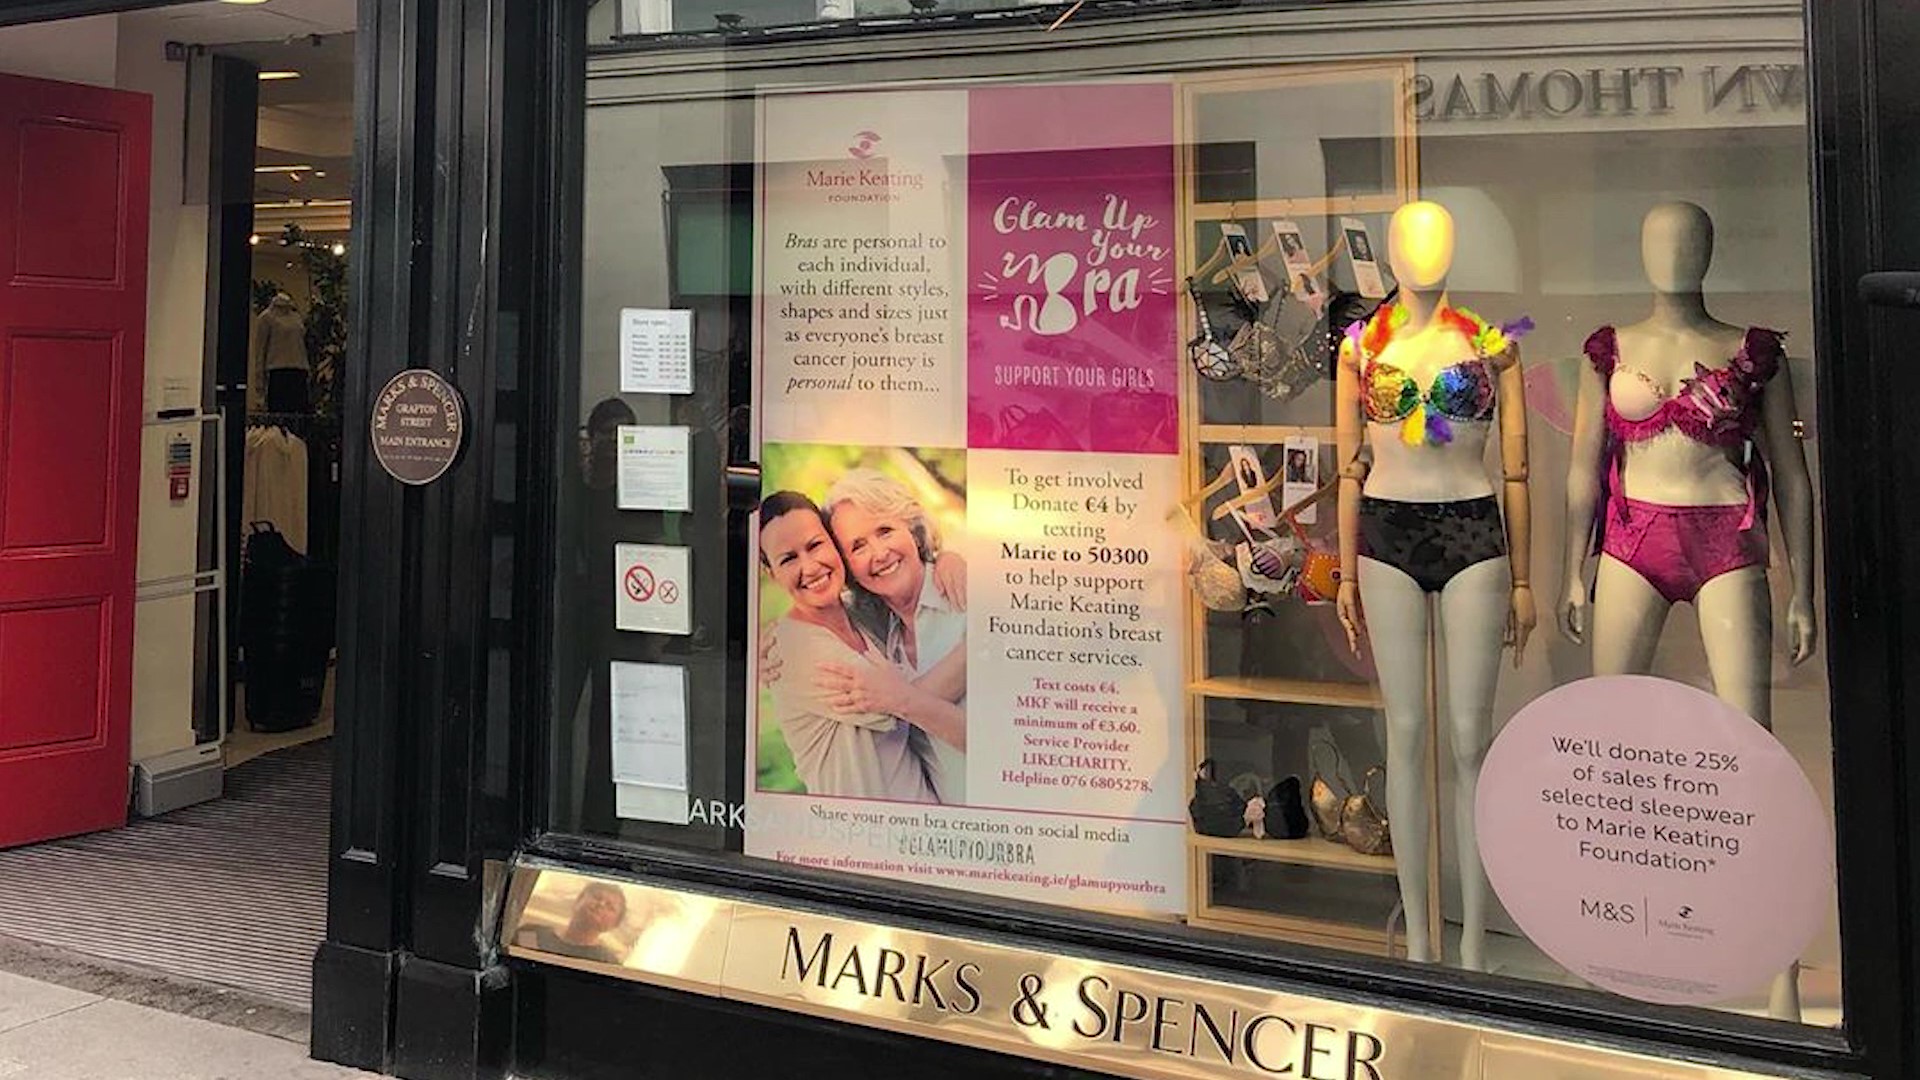 Glam Up Your Bra window display at Marks and Spencer